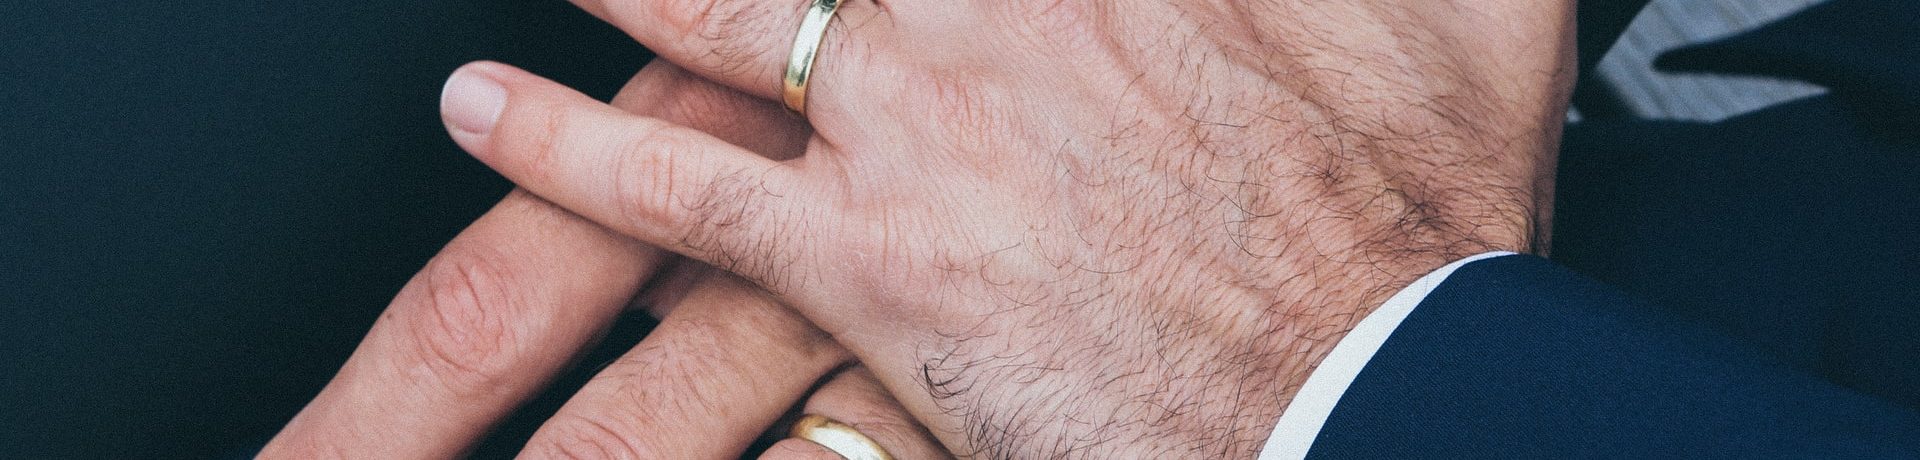 Two men's hands with wedding rings representing the laws governing same-sex divorce in Canada